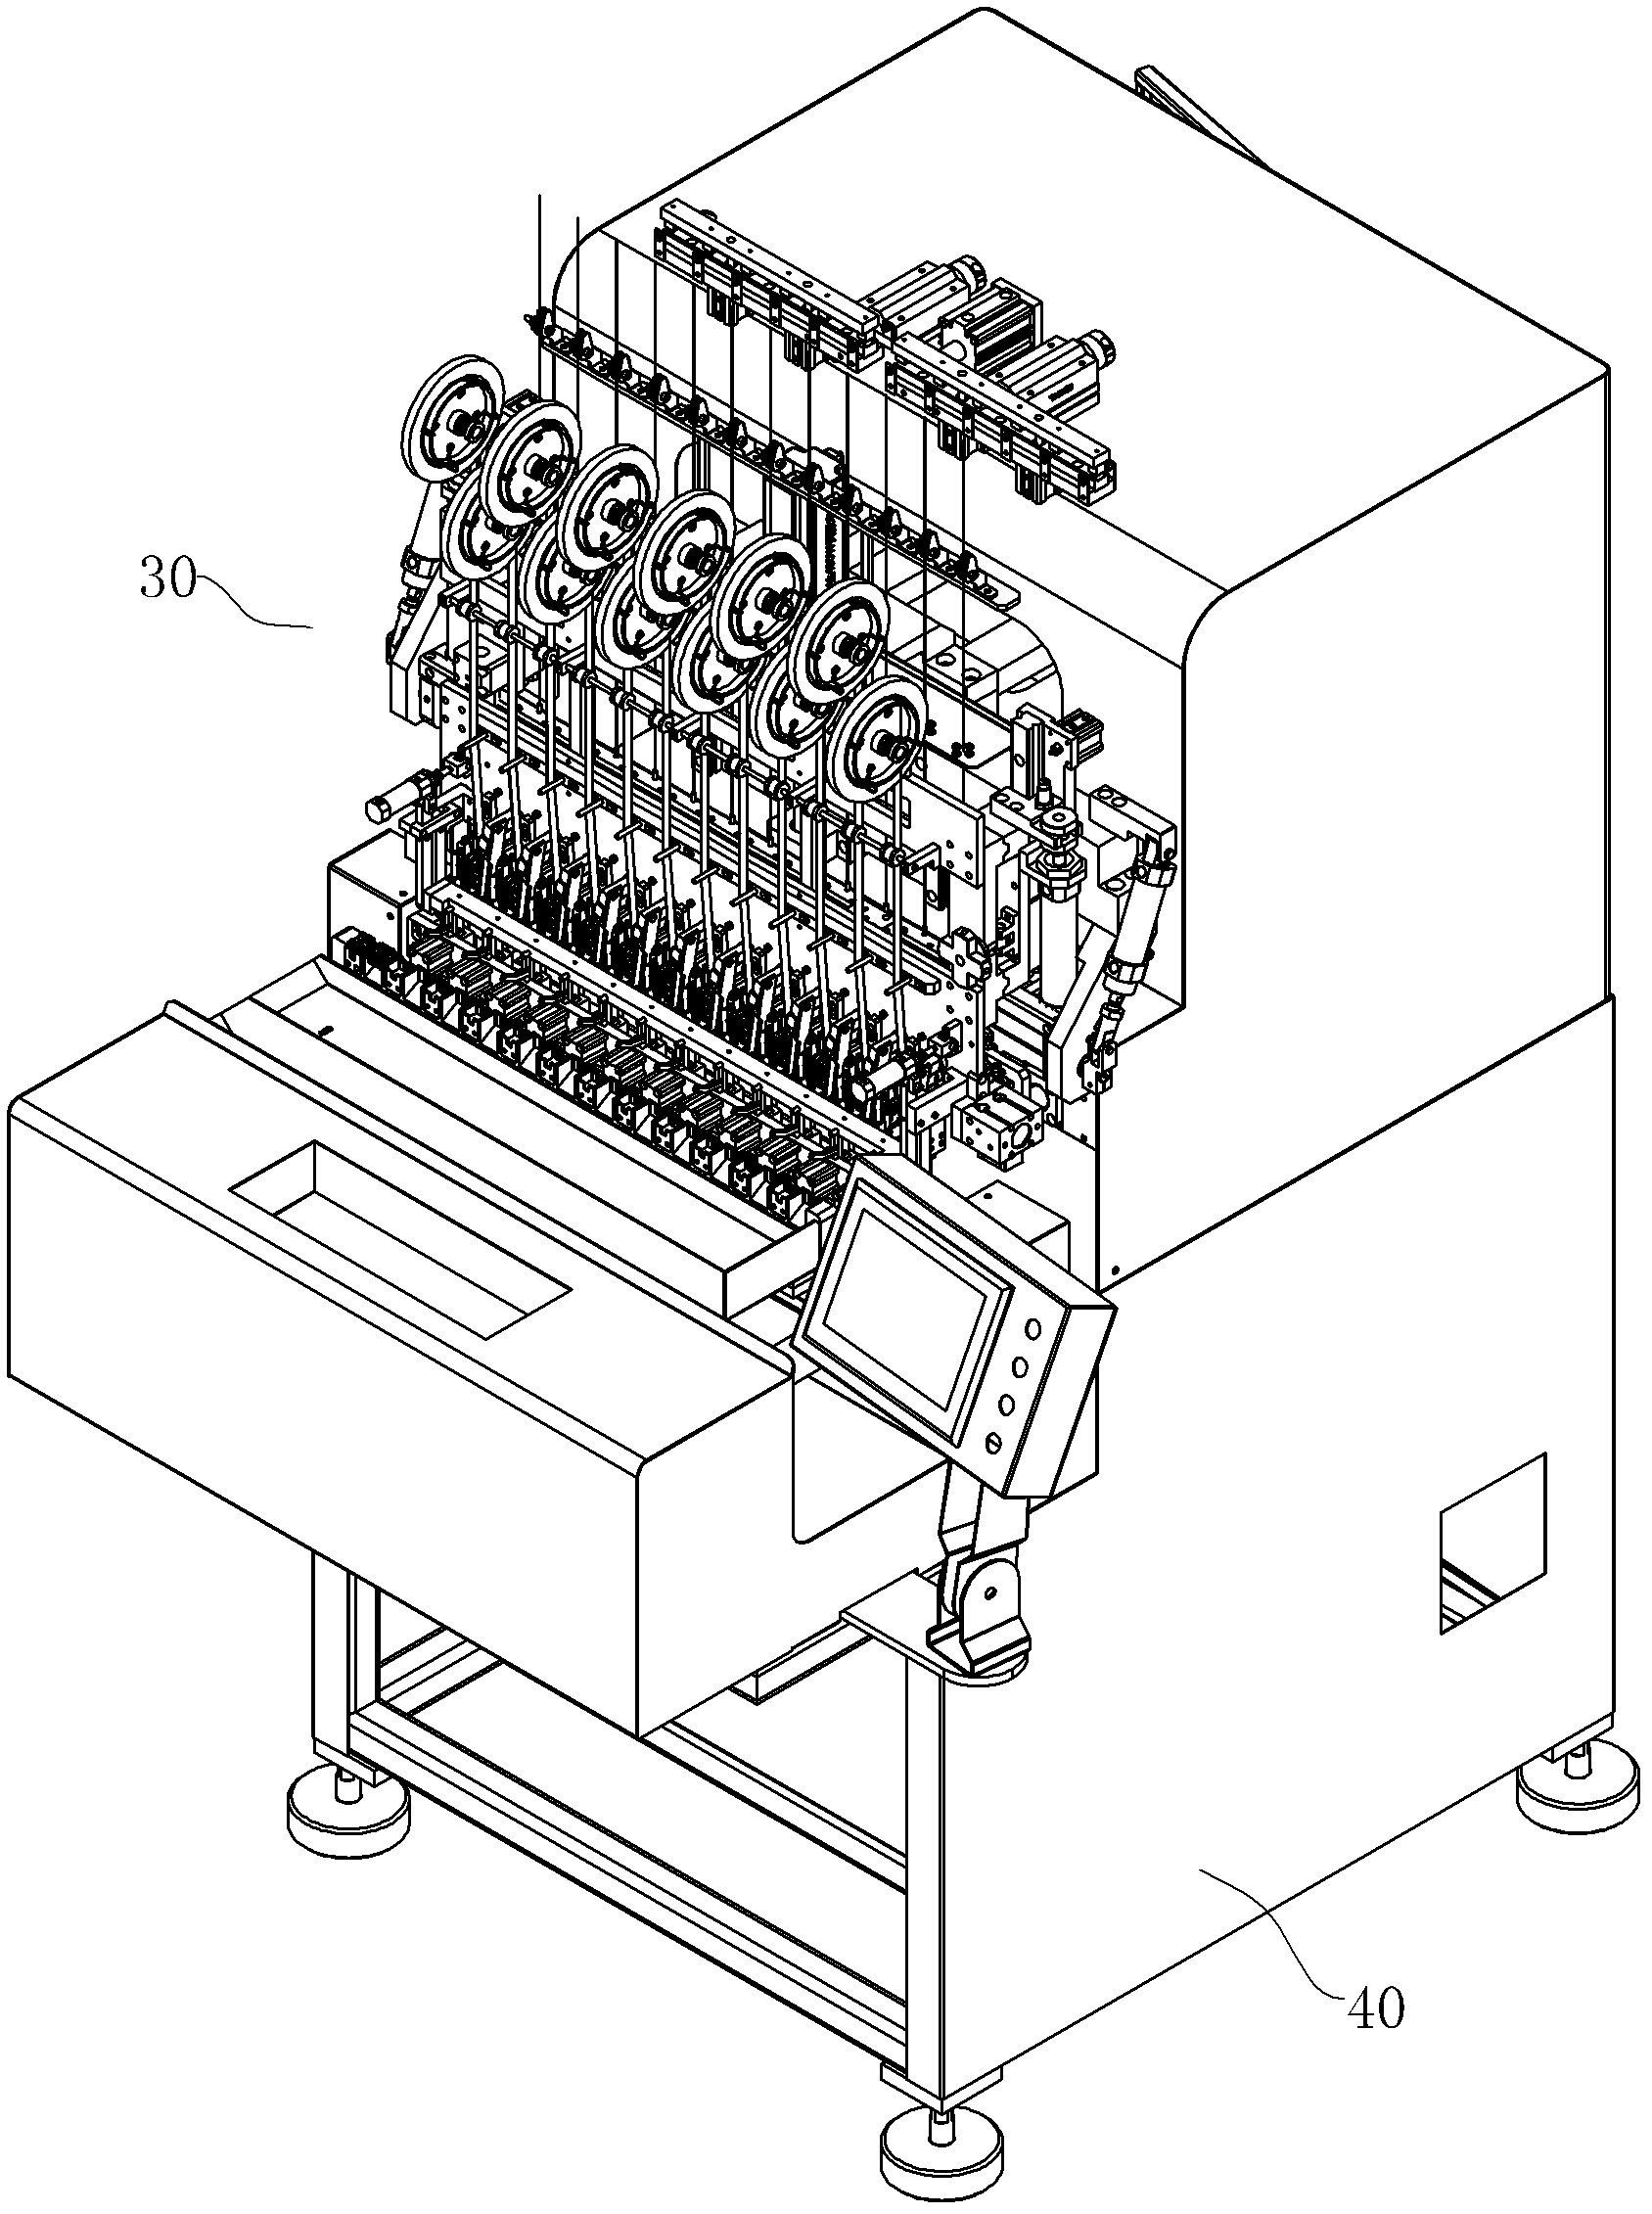 Automatic rubber-coating device installed on automatic coil winding machine